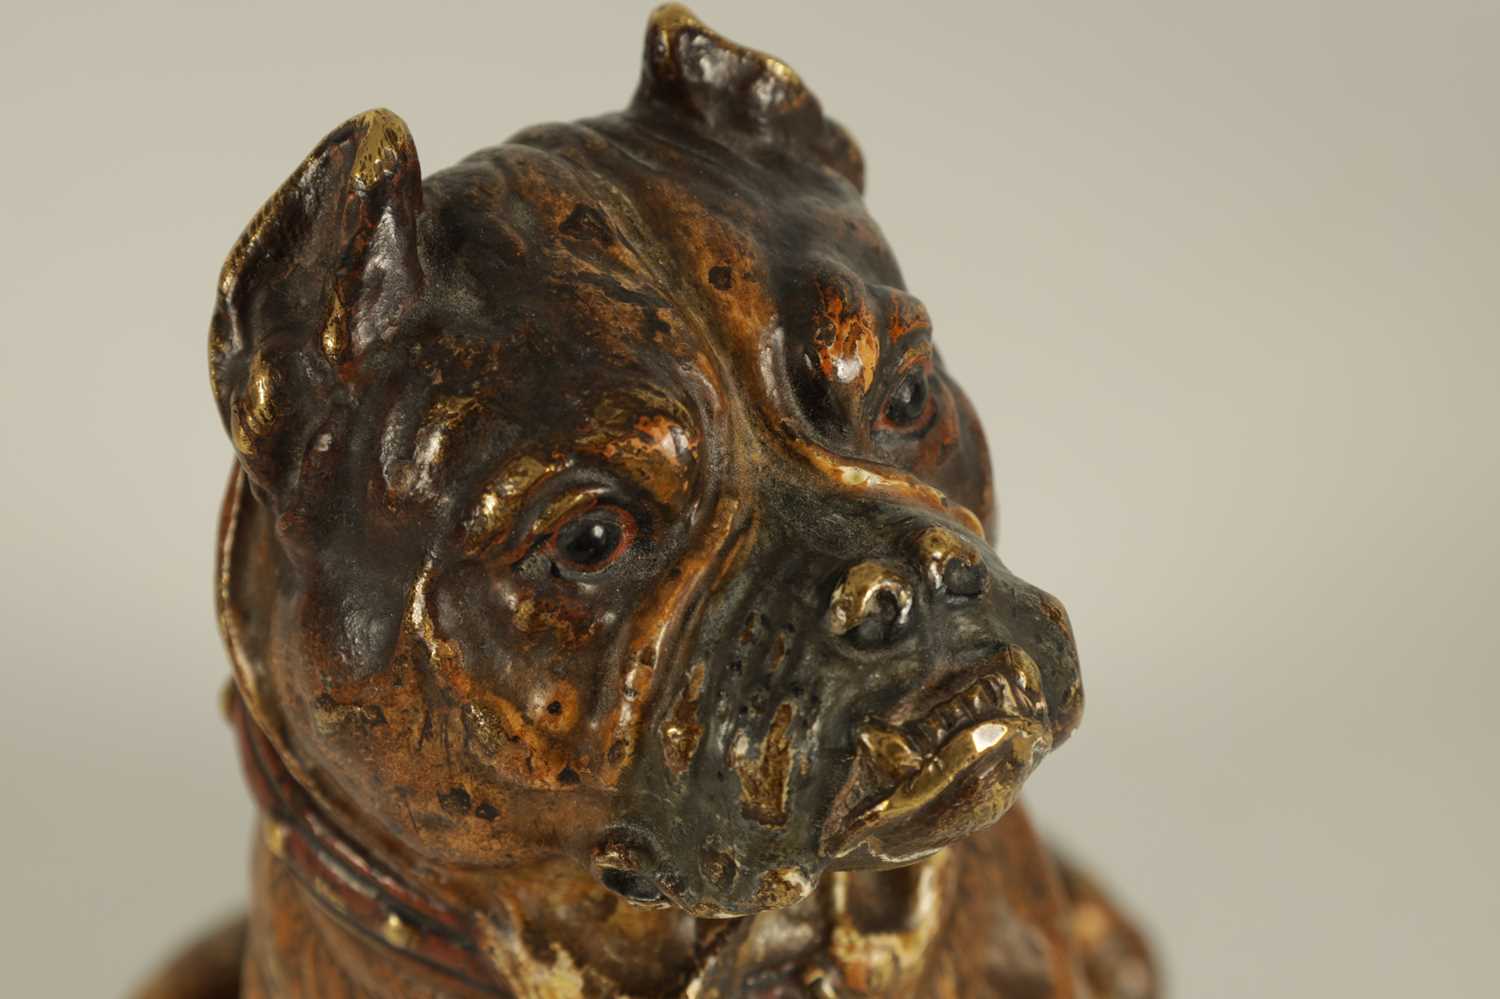 FRANZ BERGMAN, A LATE 19TH CENTURY AUSTRIAN COLD PAINTED BRONZE SCULPTURE OF A BULL MASTIFF - Image 5 of 8